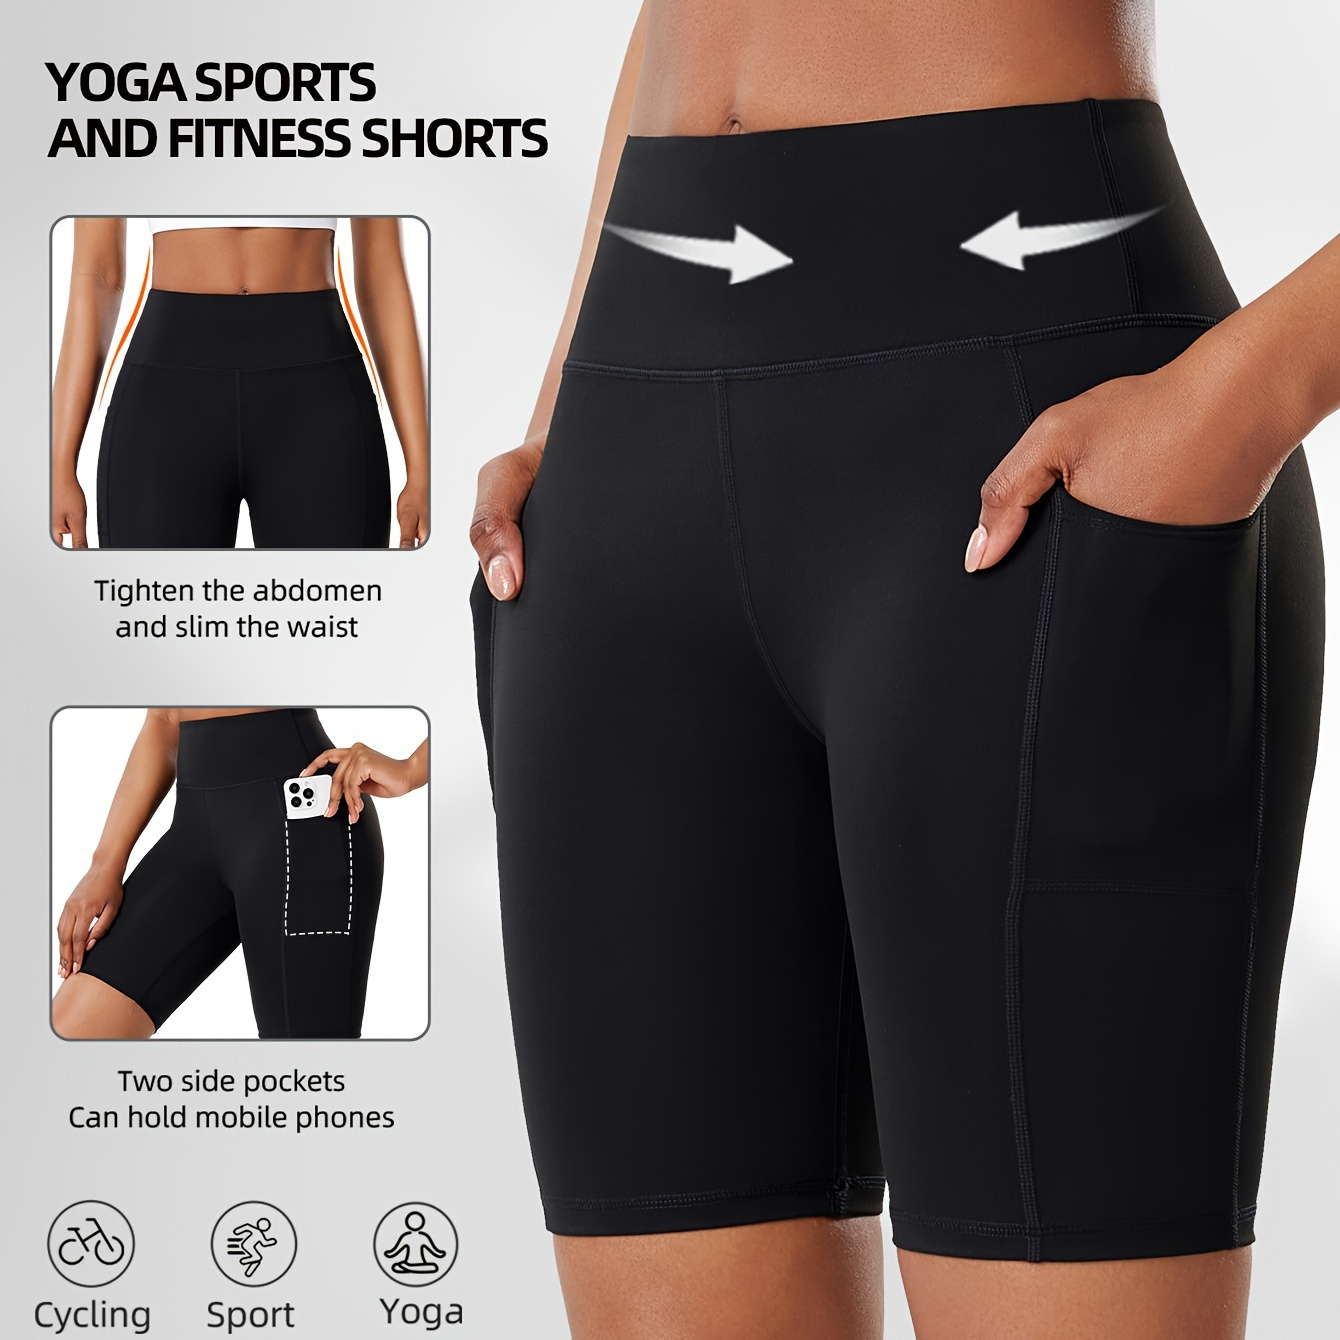 

Women's High-waist Tummy Control Yoga Shorts With Dual Side Pockets, Quick-dry Stretch Fabric For Fitness, Running, Cycling, And Sports Training